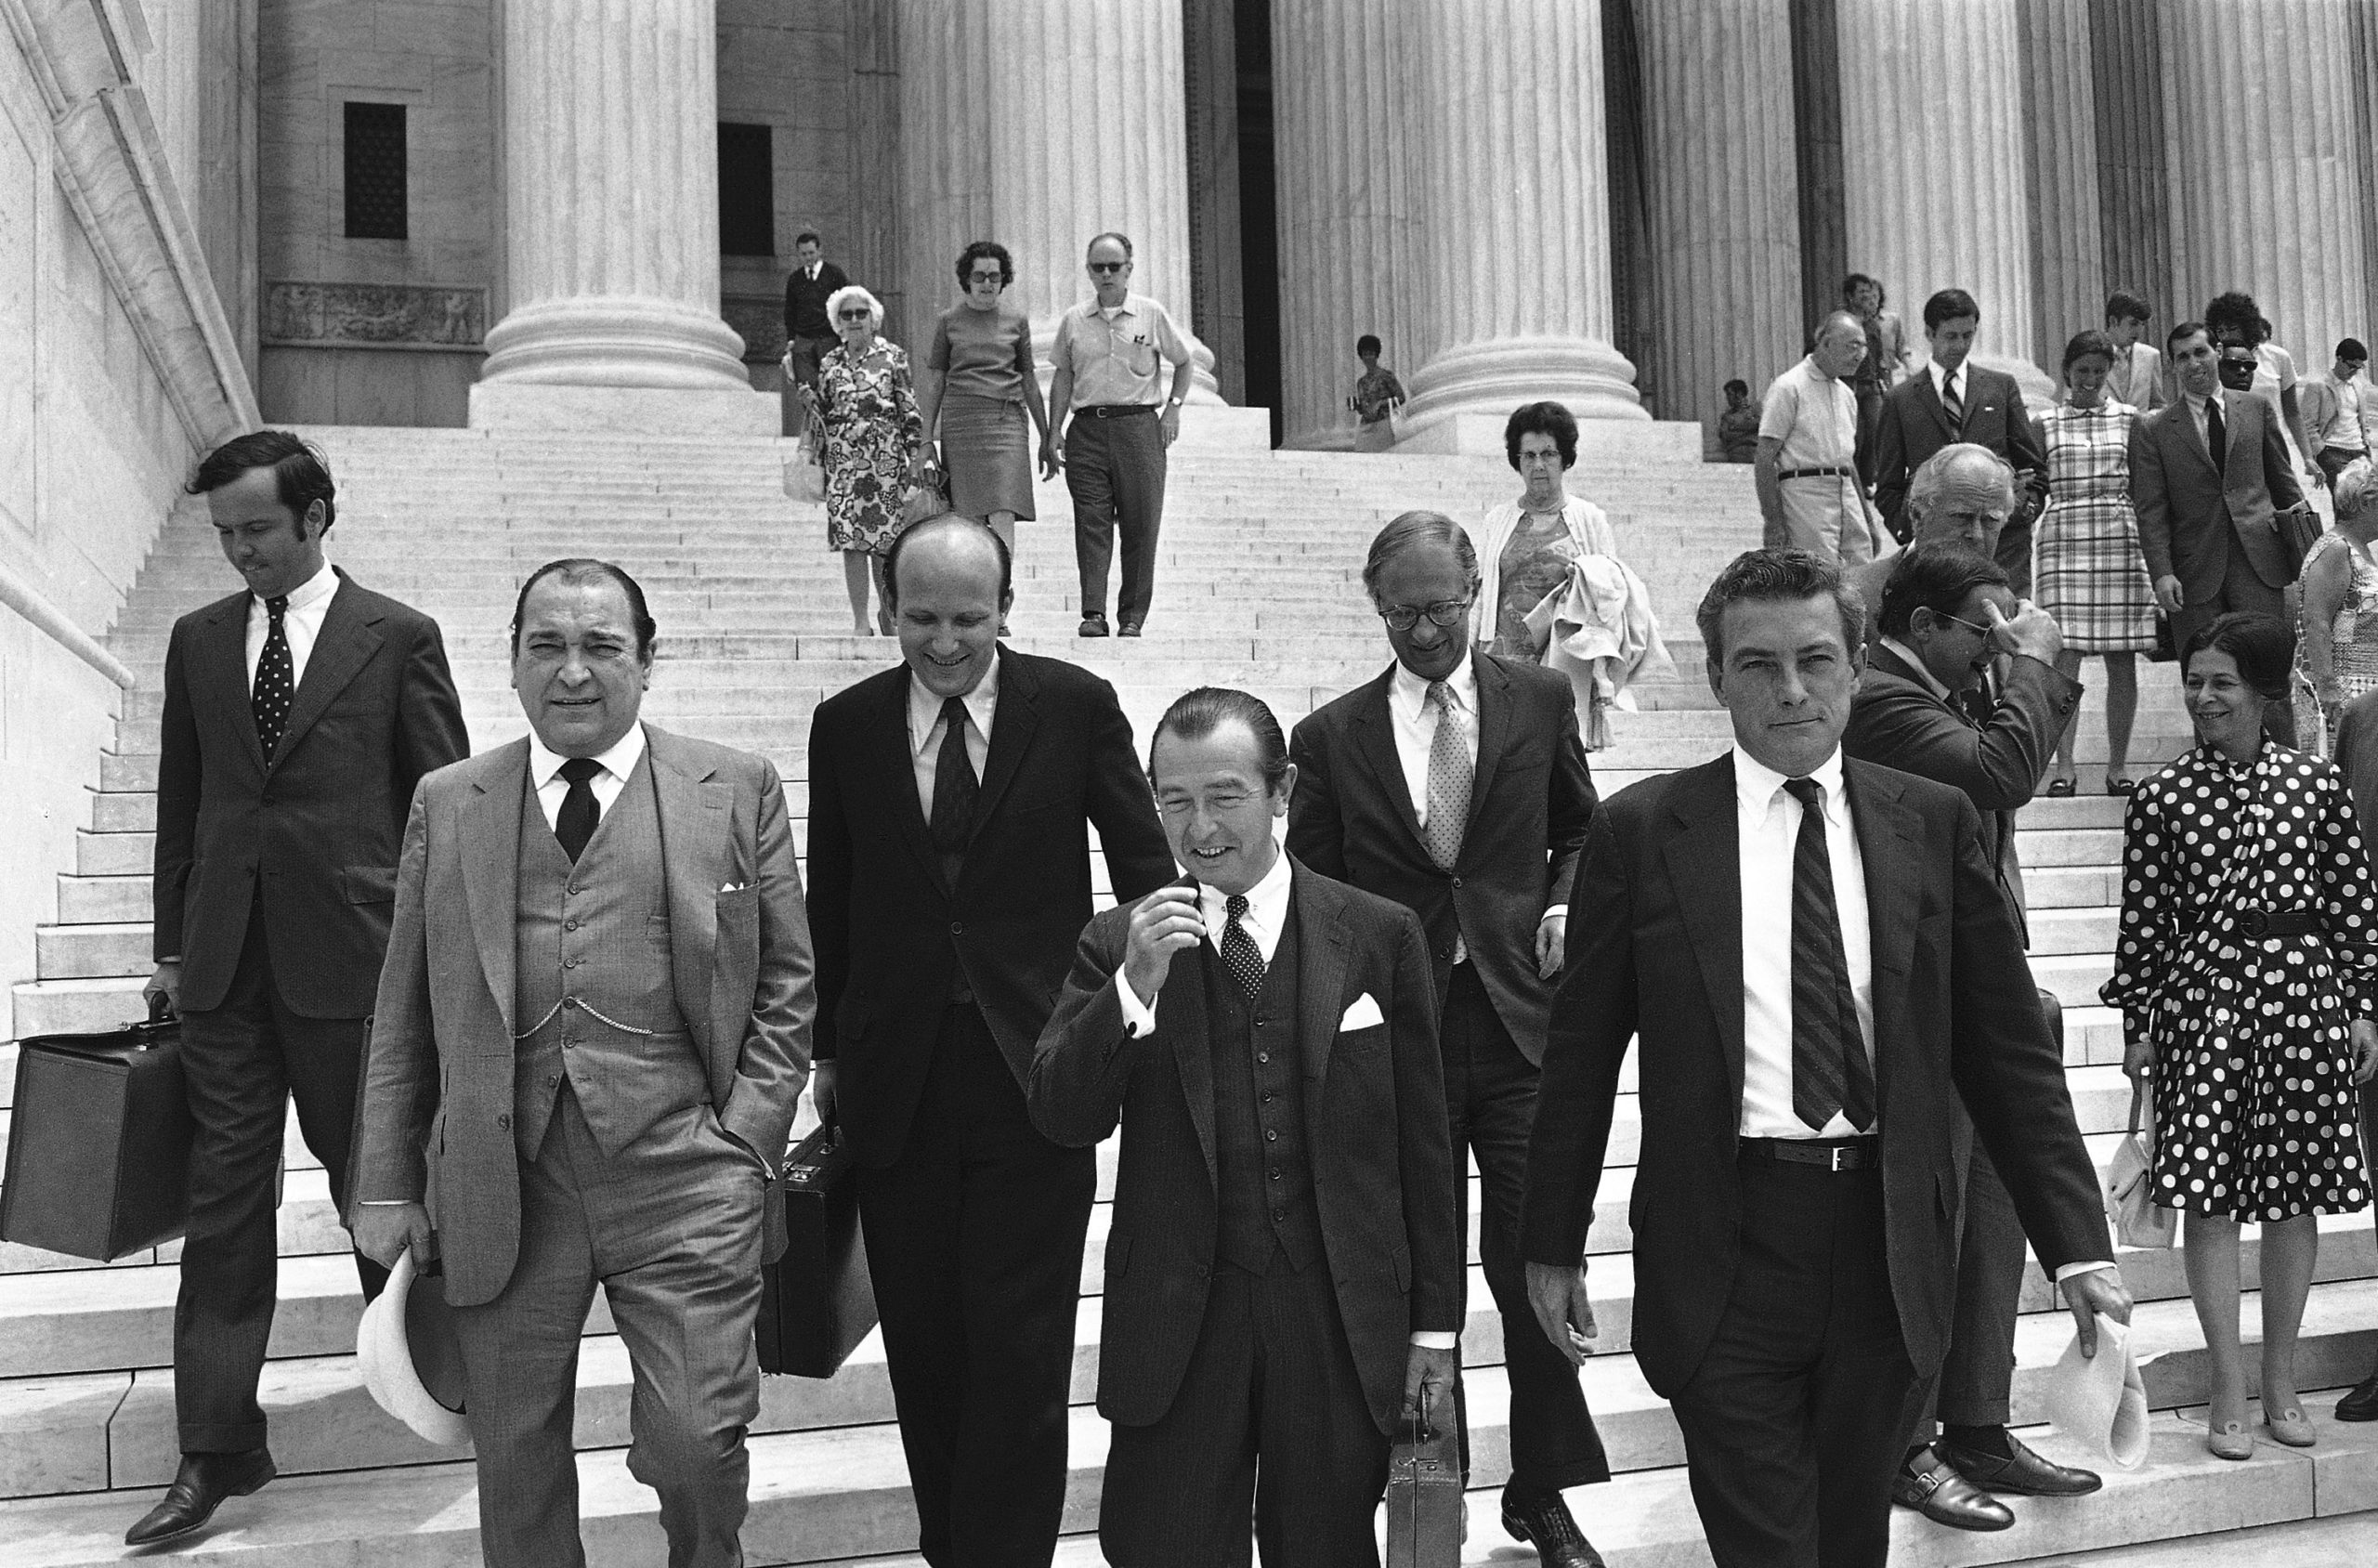 Six Attorneys for The New York Times walk down the steps of the Supreme Court side by side